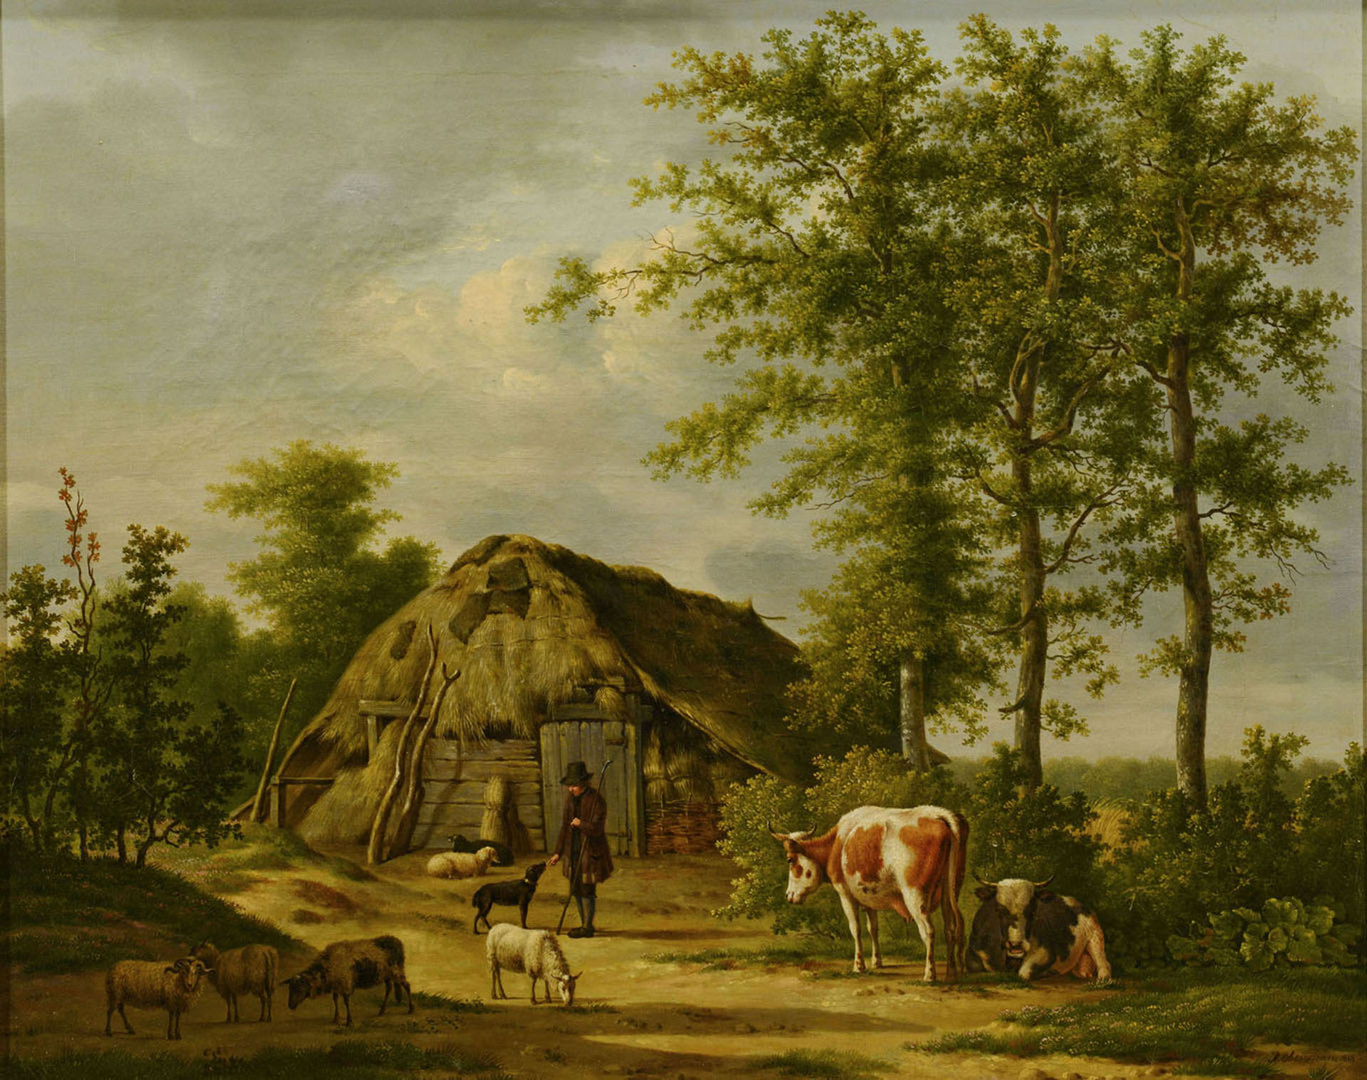 Lot 42: Anthony Oberman Pastoral Landscape with Farmstead